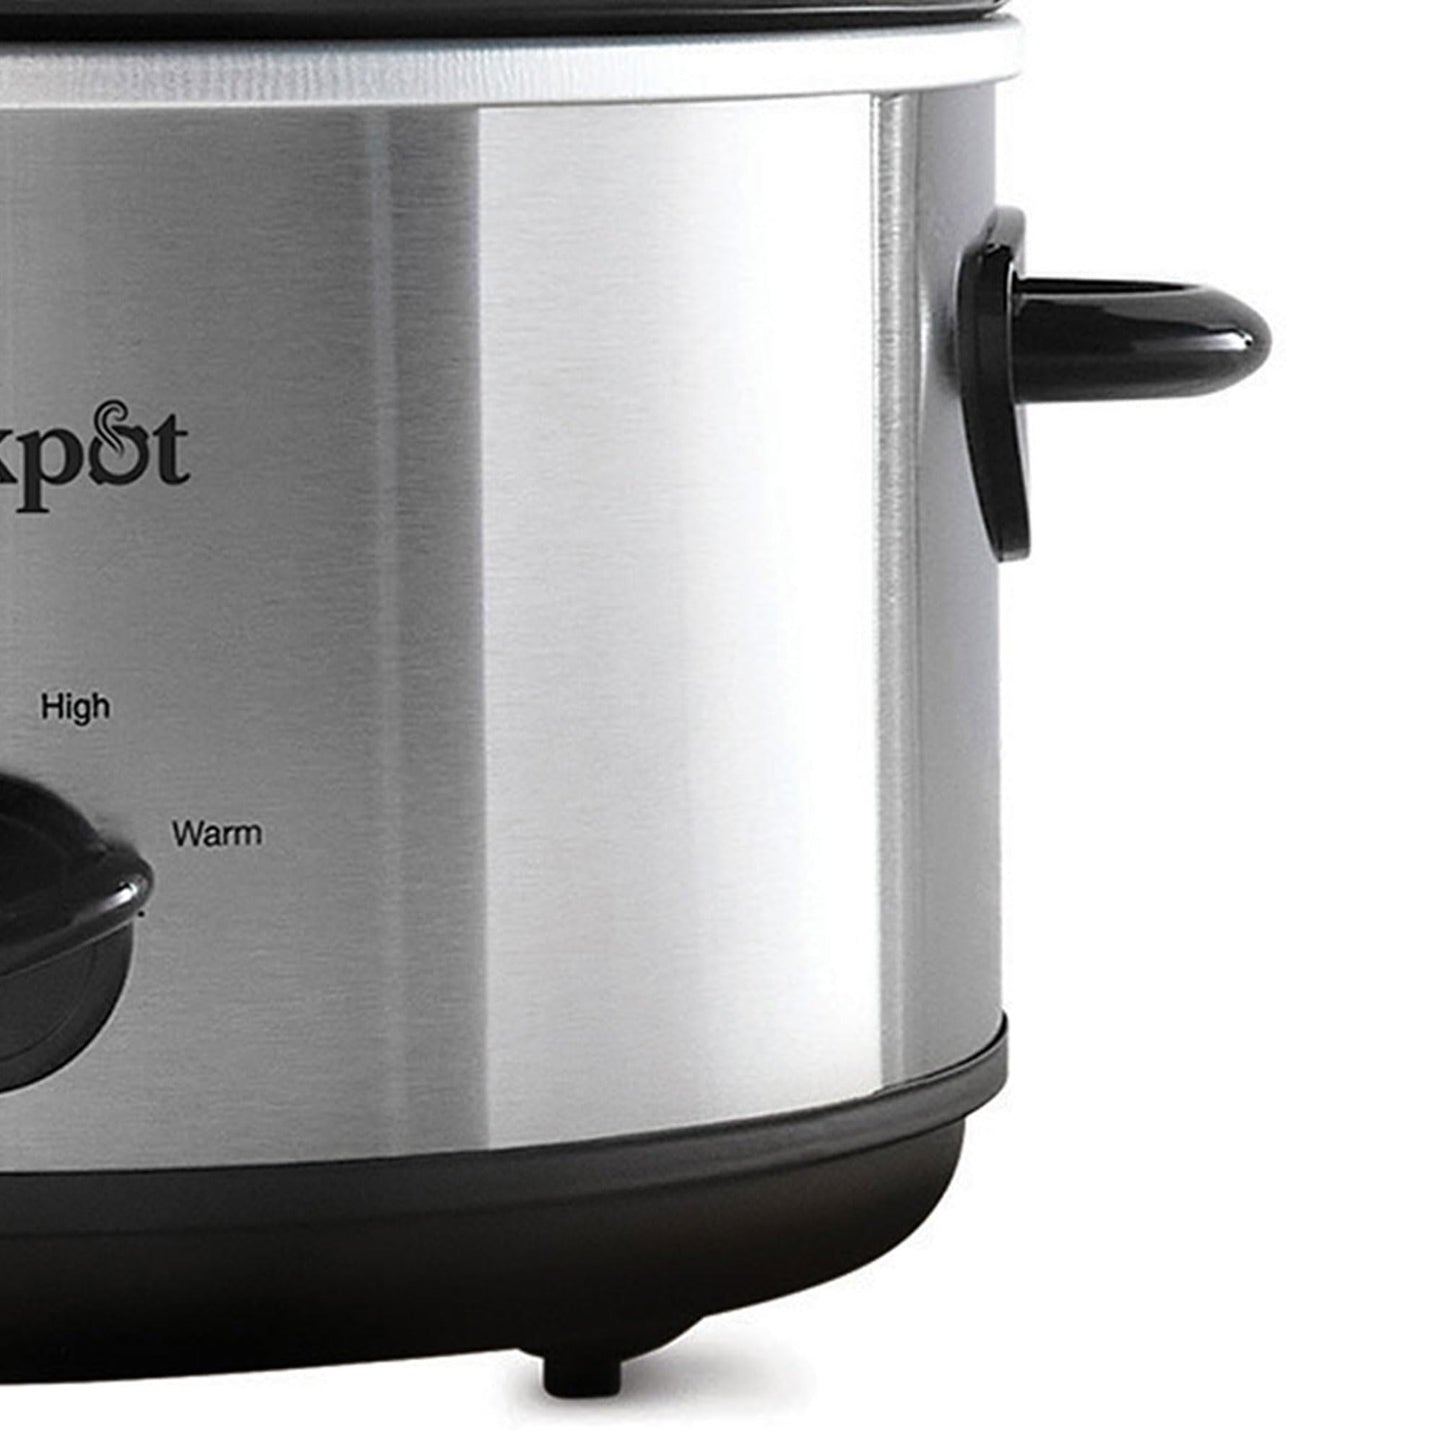 Crock-Pot 4.5 Quarts Manual Design Series Slow Cooker with 3 Manual Heat Settings Cooks Meals for 4 Plus People with Removable Stoneware Bowl, Silver